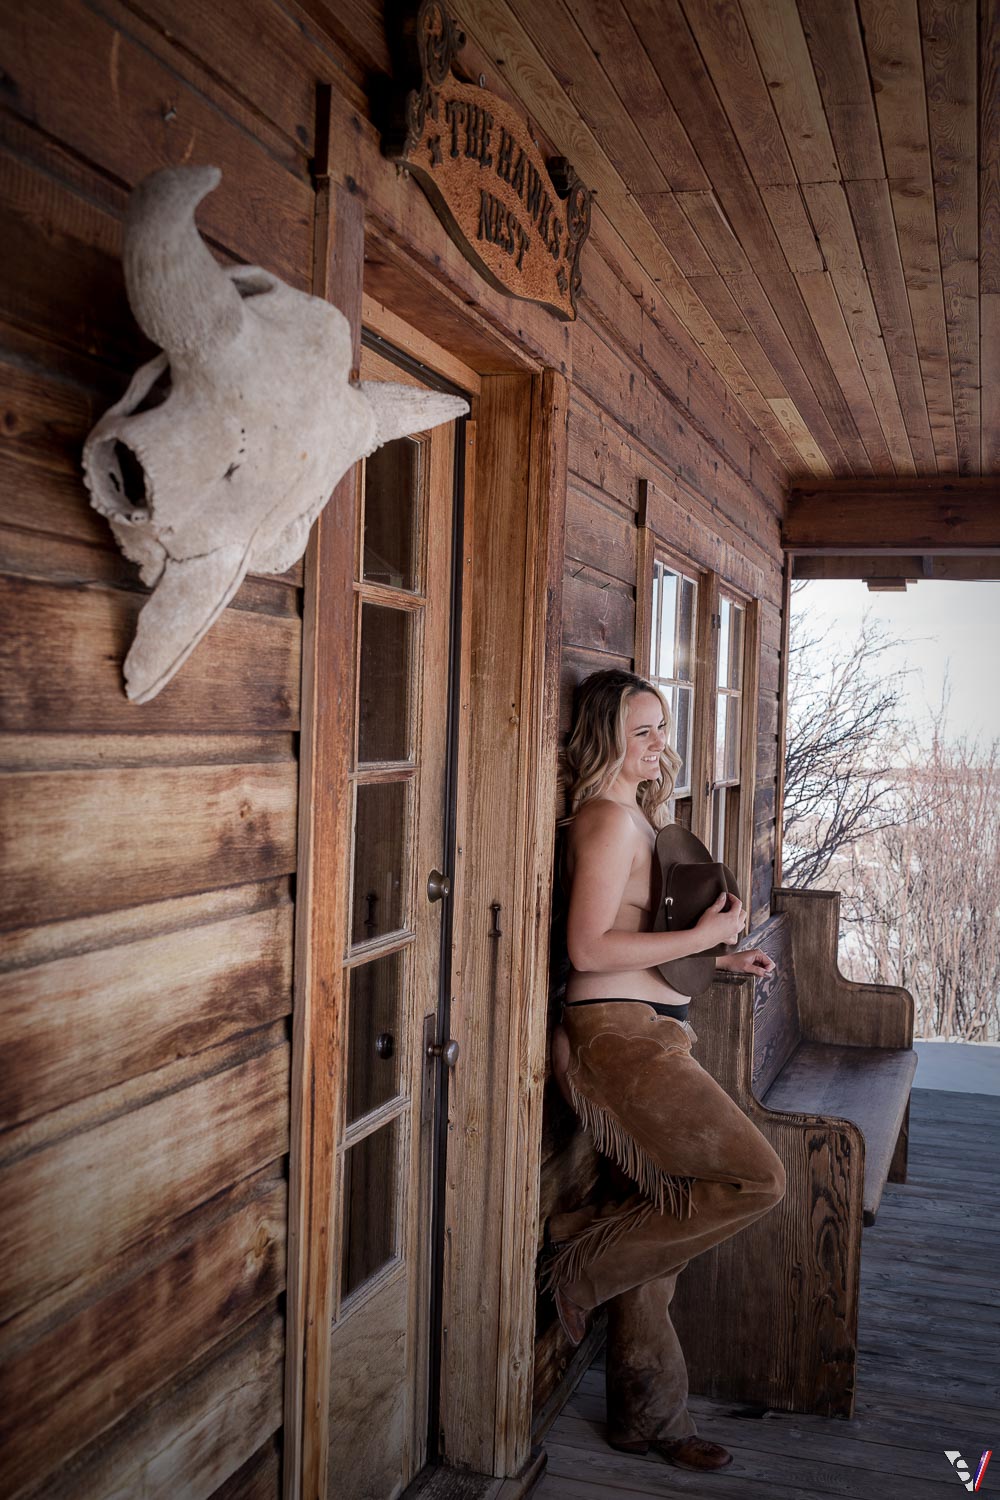 Cow skull as decor for this lovely cabin. And a stylish top-less photo. 